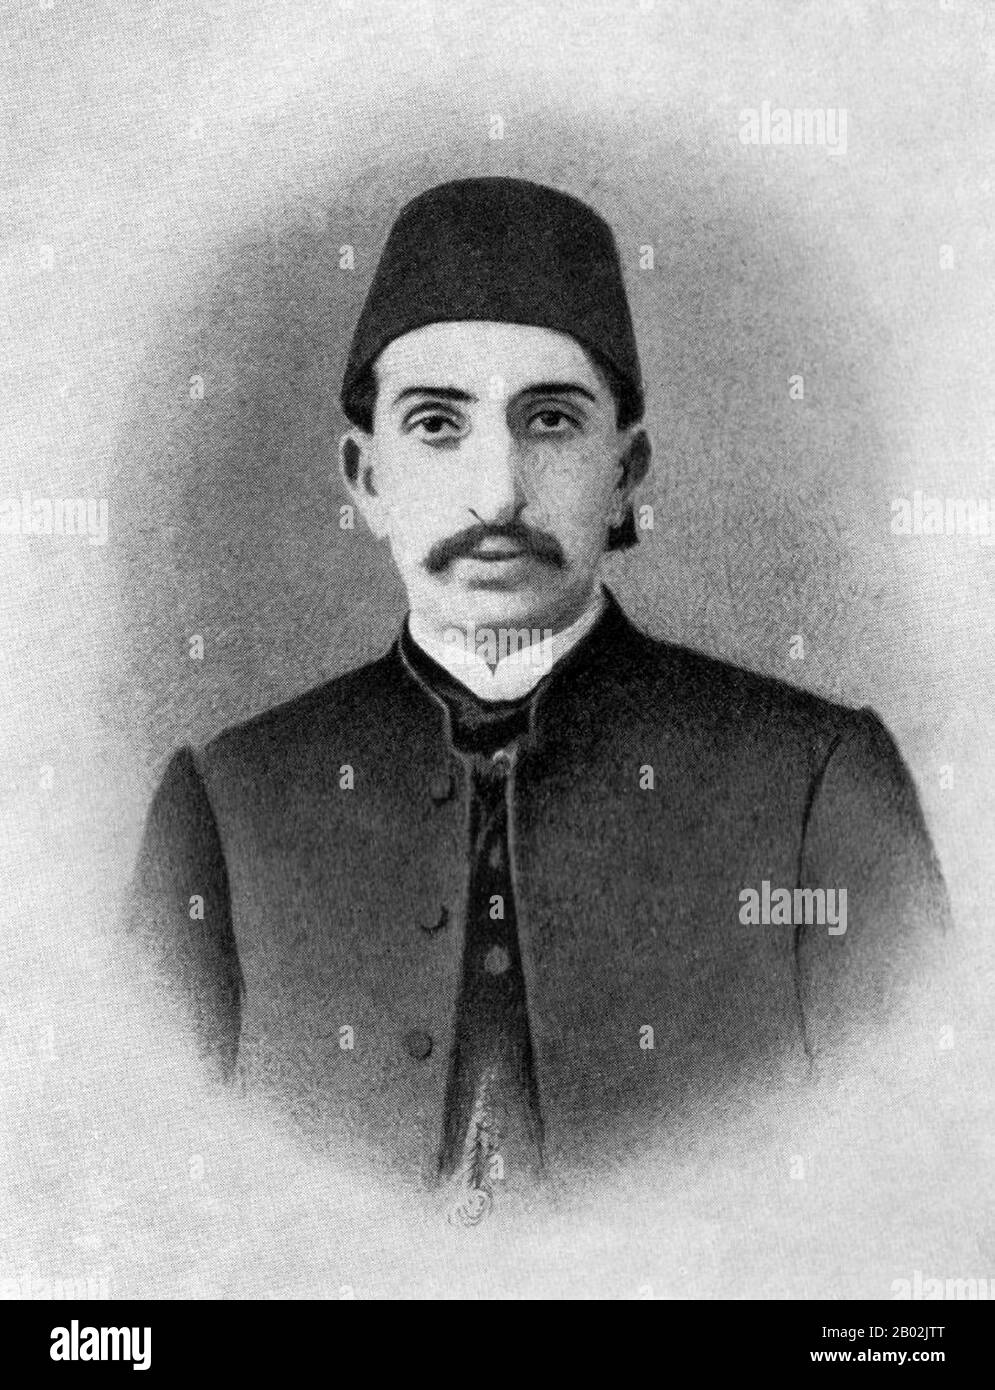 Abdul Hamid II (Ottoman Turkish: عبد الحميد ثانی, `Abdü’l-Ḥamīd-i sânî; Turkish: İkinci Abdülhamit; 22 September 1842 – 10 February 1918) was the 34th Sultan of the Ottoman Empire and the last Sultan to exert effective autocratic control over the fracturing state. He oversaw a period of decline in the power and extent of the Empire, including widespread pogroms and government massacres against the minorities of the Empire (named the Hamidian massacres after him) as well as an assassination attempt, ruling from 31 August 1876 until he was deposed shortly after the 1908 Young Turk Revolution, on Stock Photo